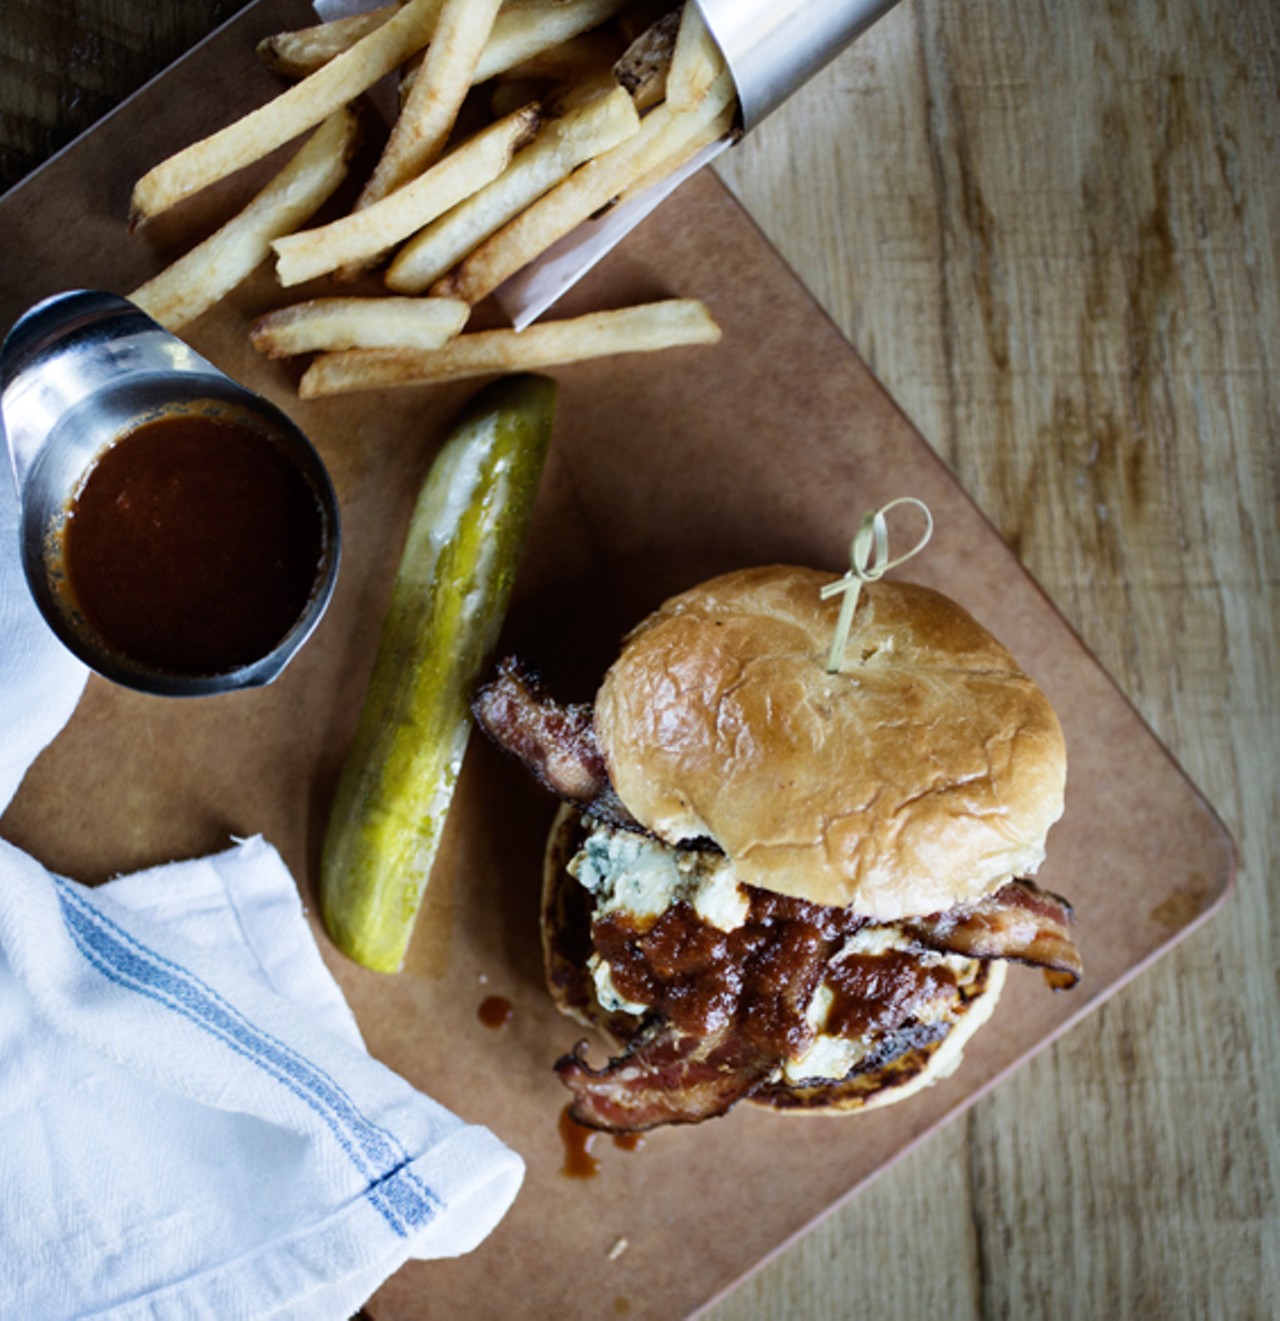 The "BBBB" is barbecued burger made of a blend of bison, blue cheese and bacon on a brioche bun.